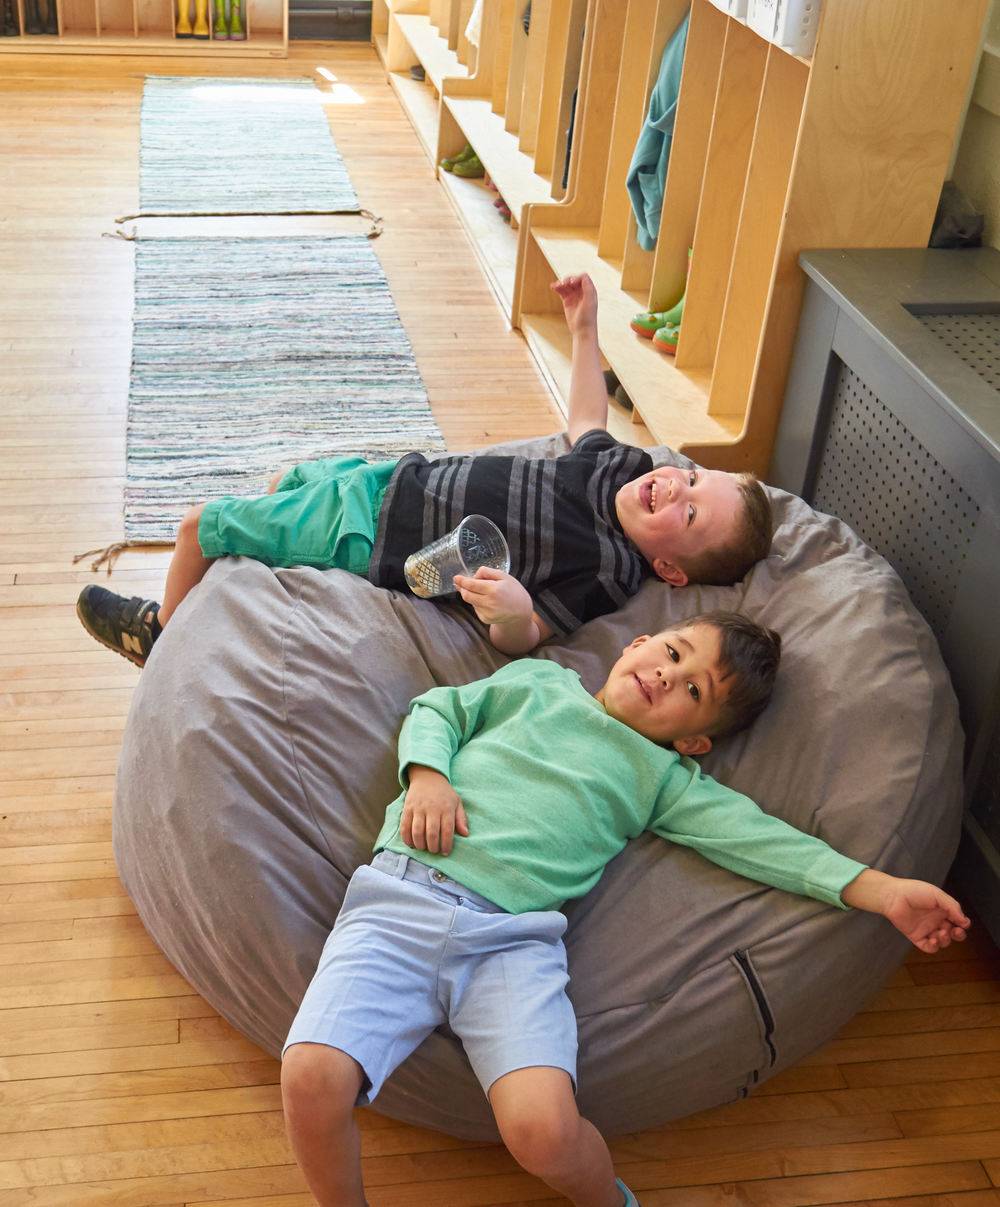 Two young boys lie on a grey bean bag chair in a room with wooden floors.